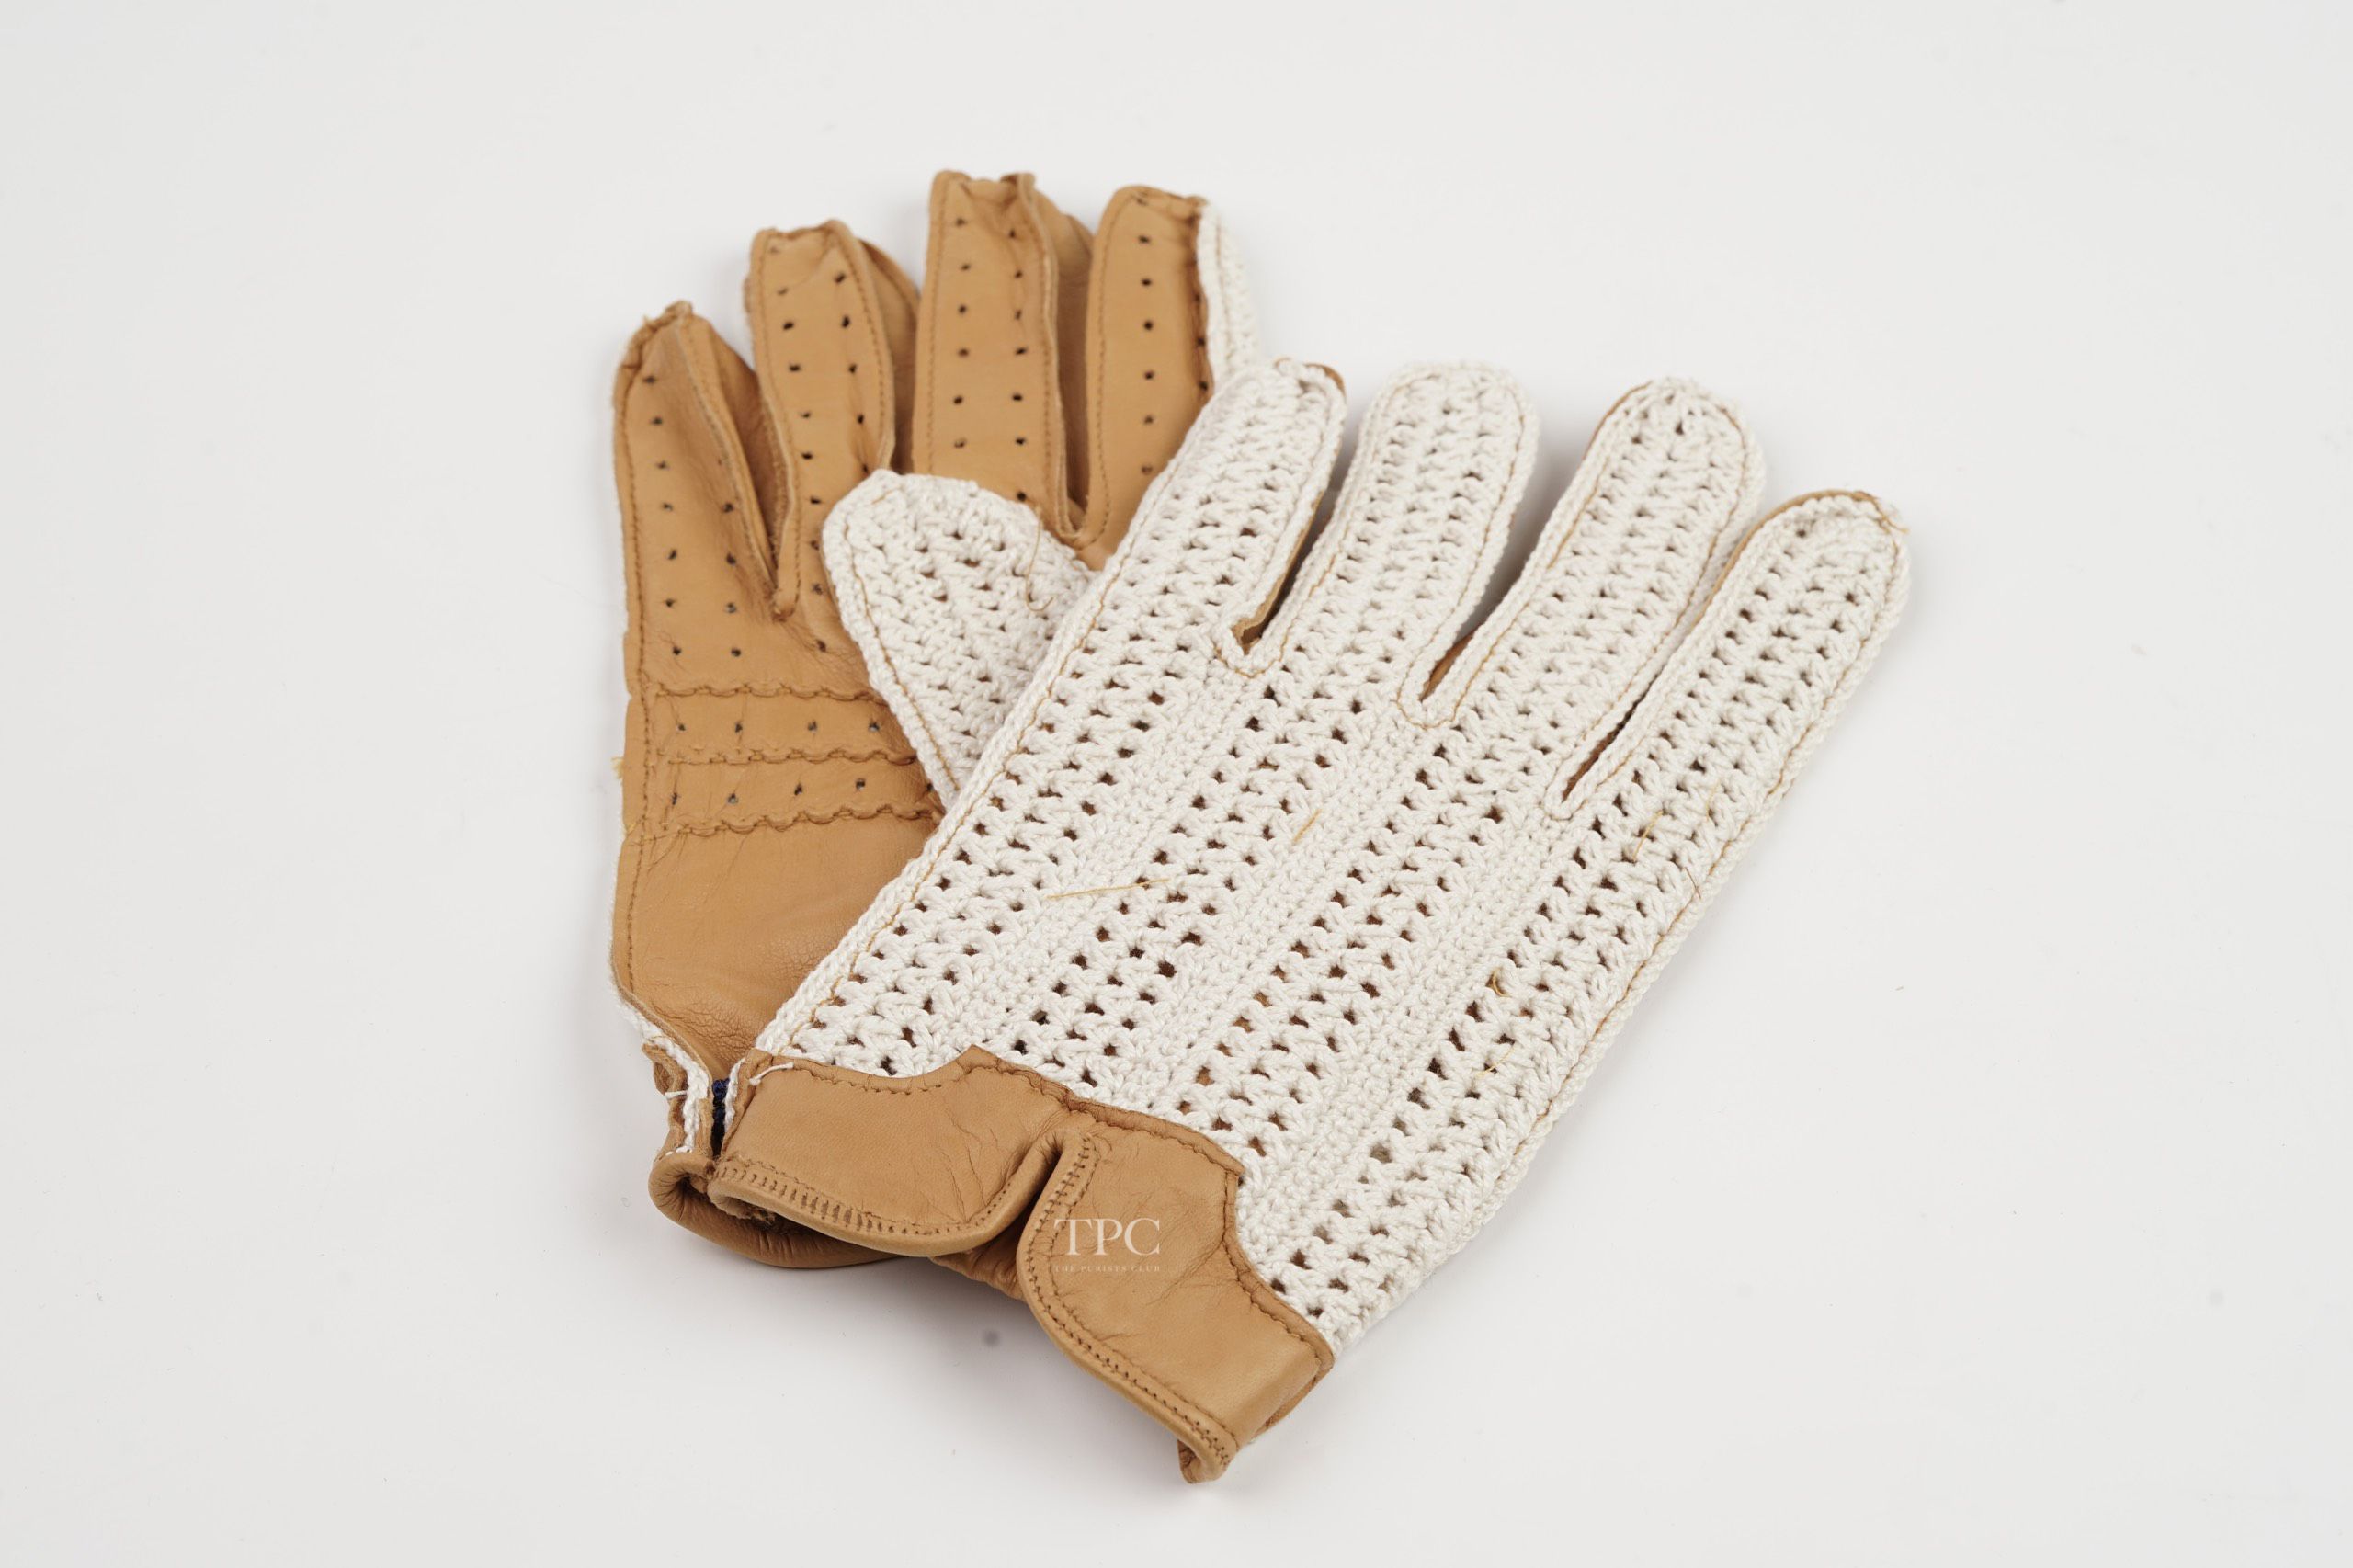 OMEGAGloves CROCHET. MAN GLOVE LAMBSKIN/ENTIRELY SEWN BY HAND, CROCHET/STYLE, UNLINED. OCRE.